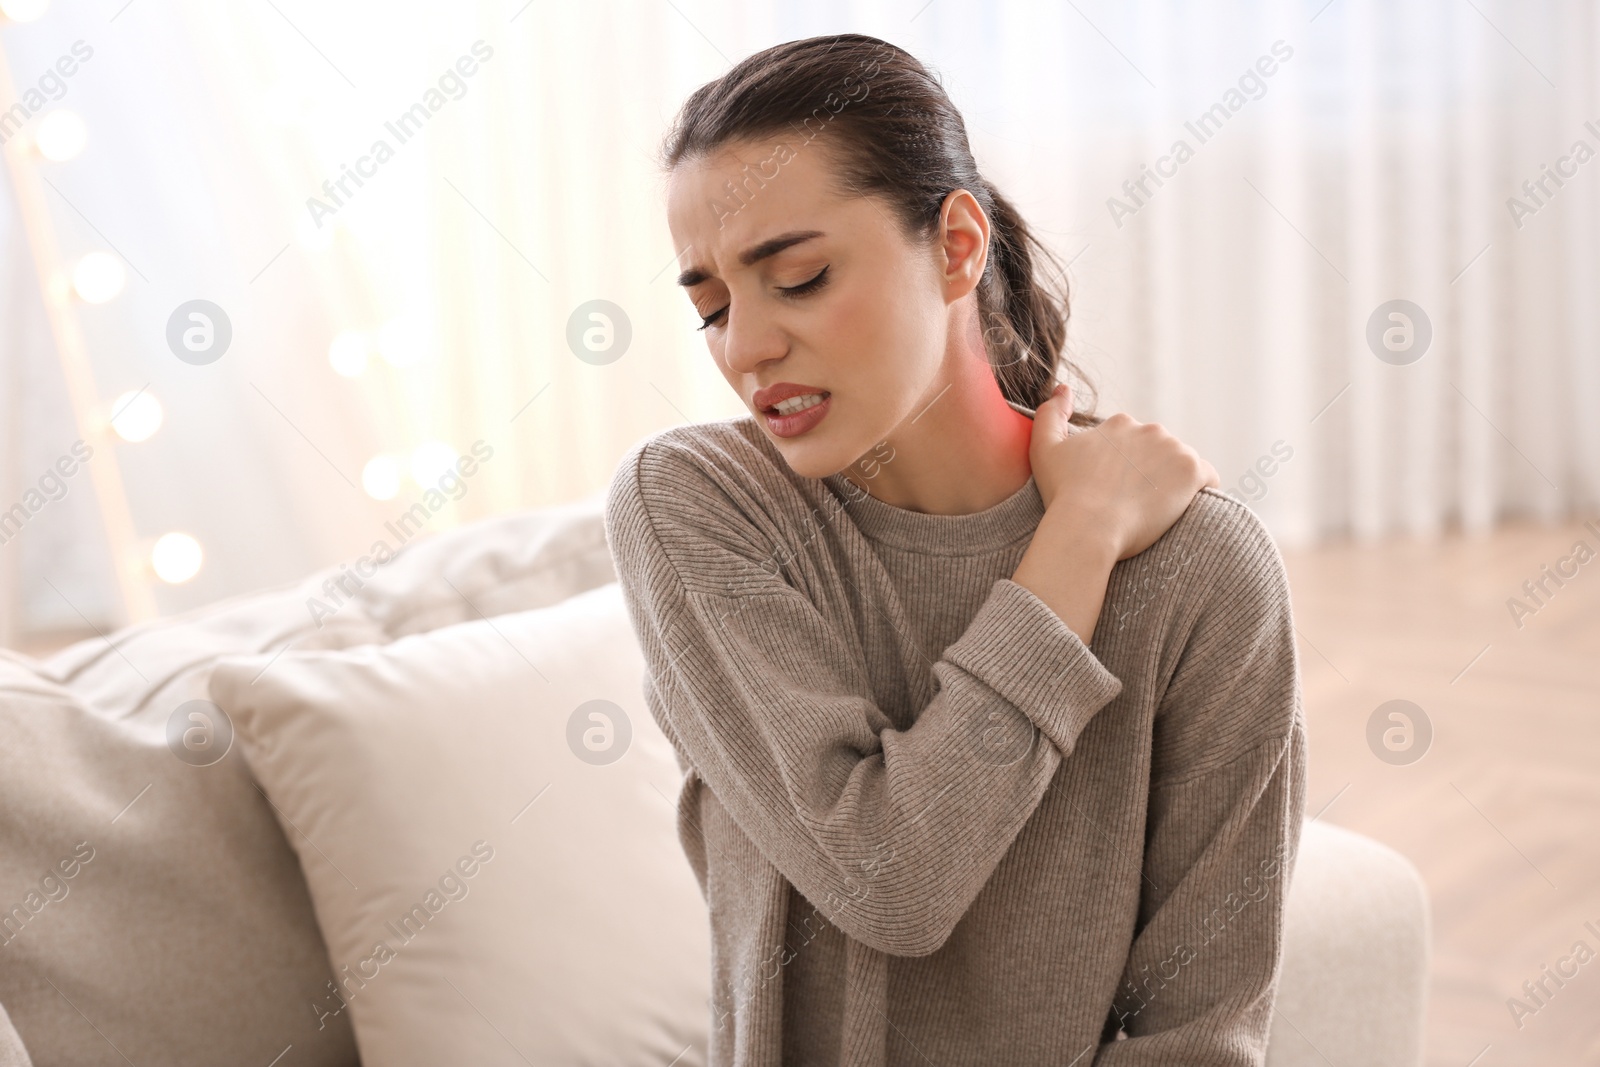 Image of Woman suffering from neck pain at home